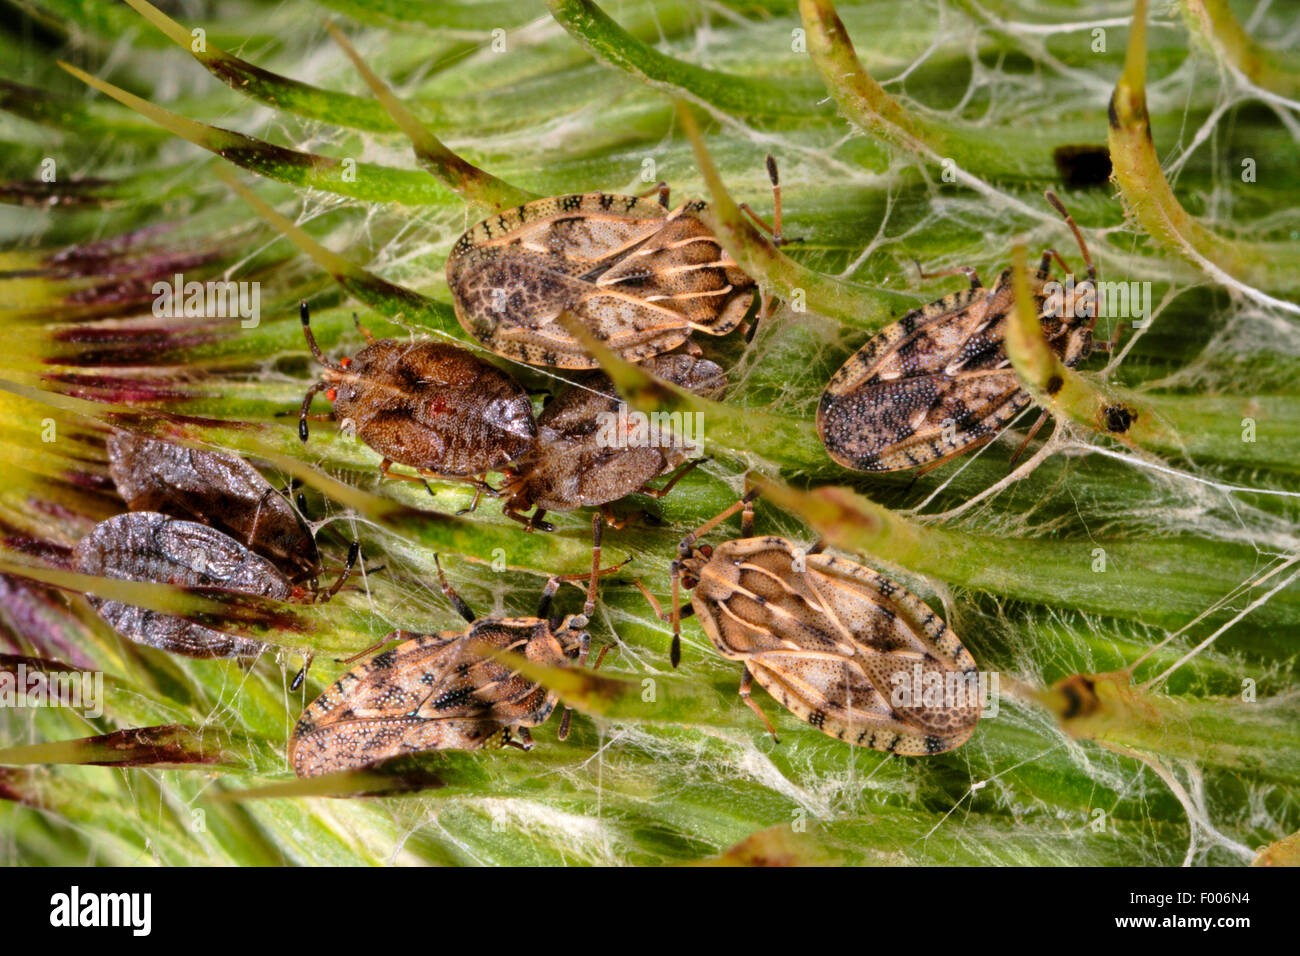 Spear thistle lacebug, Spear thistle lace bug (Tingis cardui), group on a plant, Germany Stock Photo